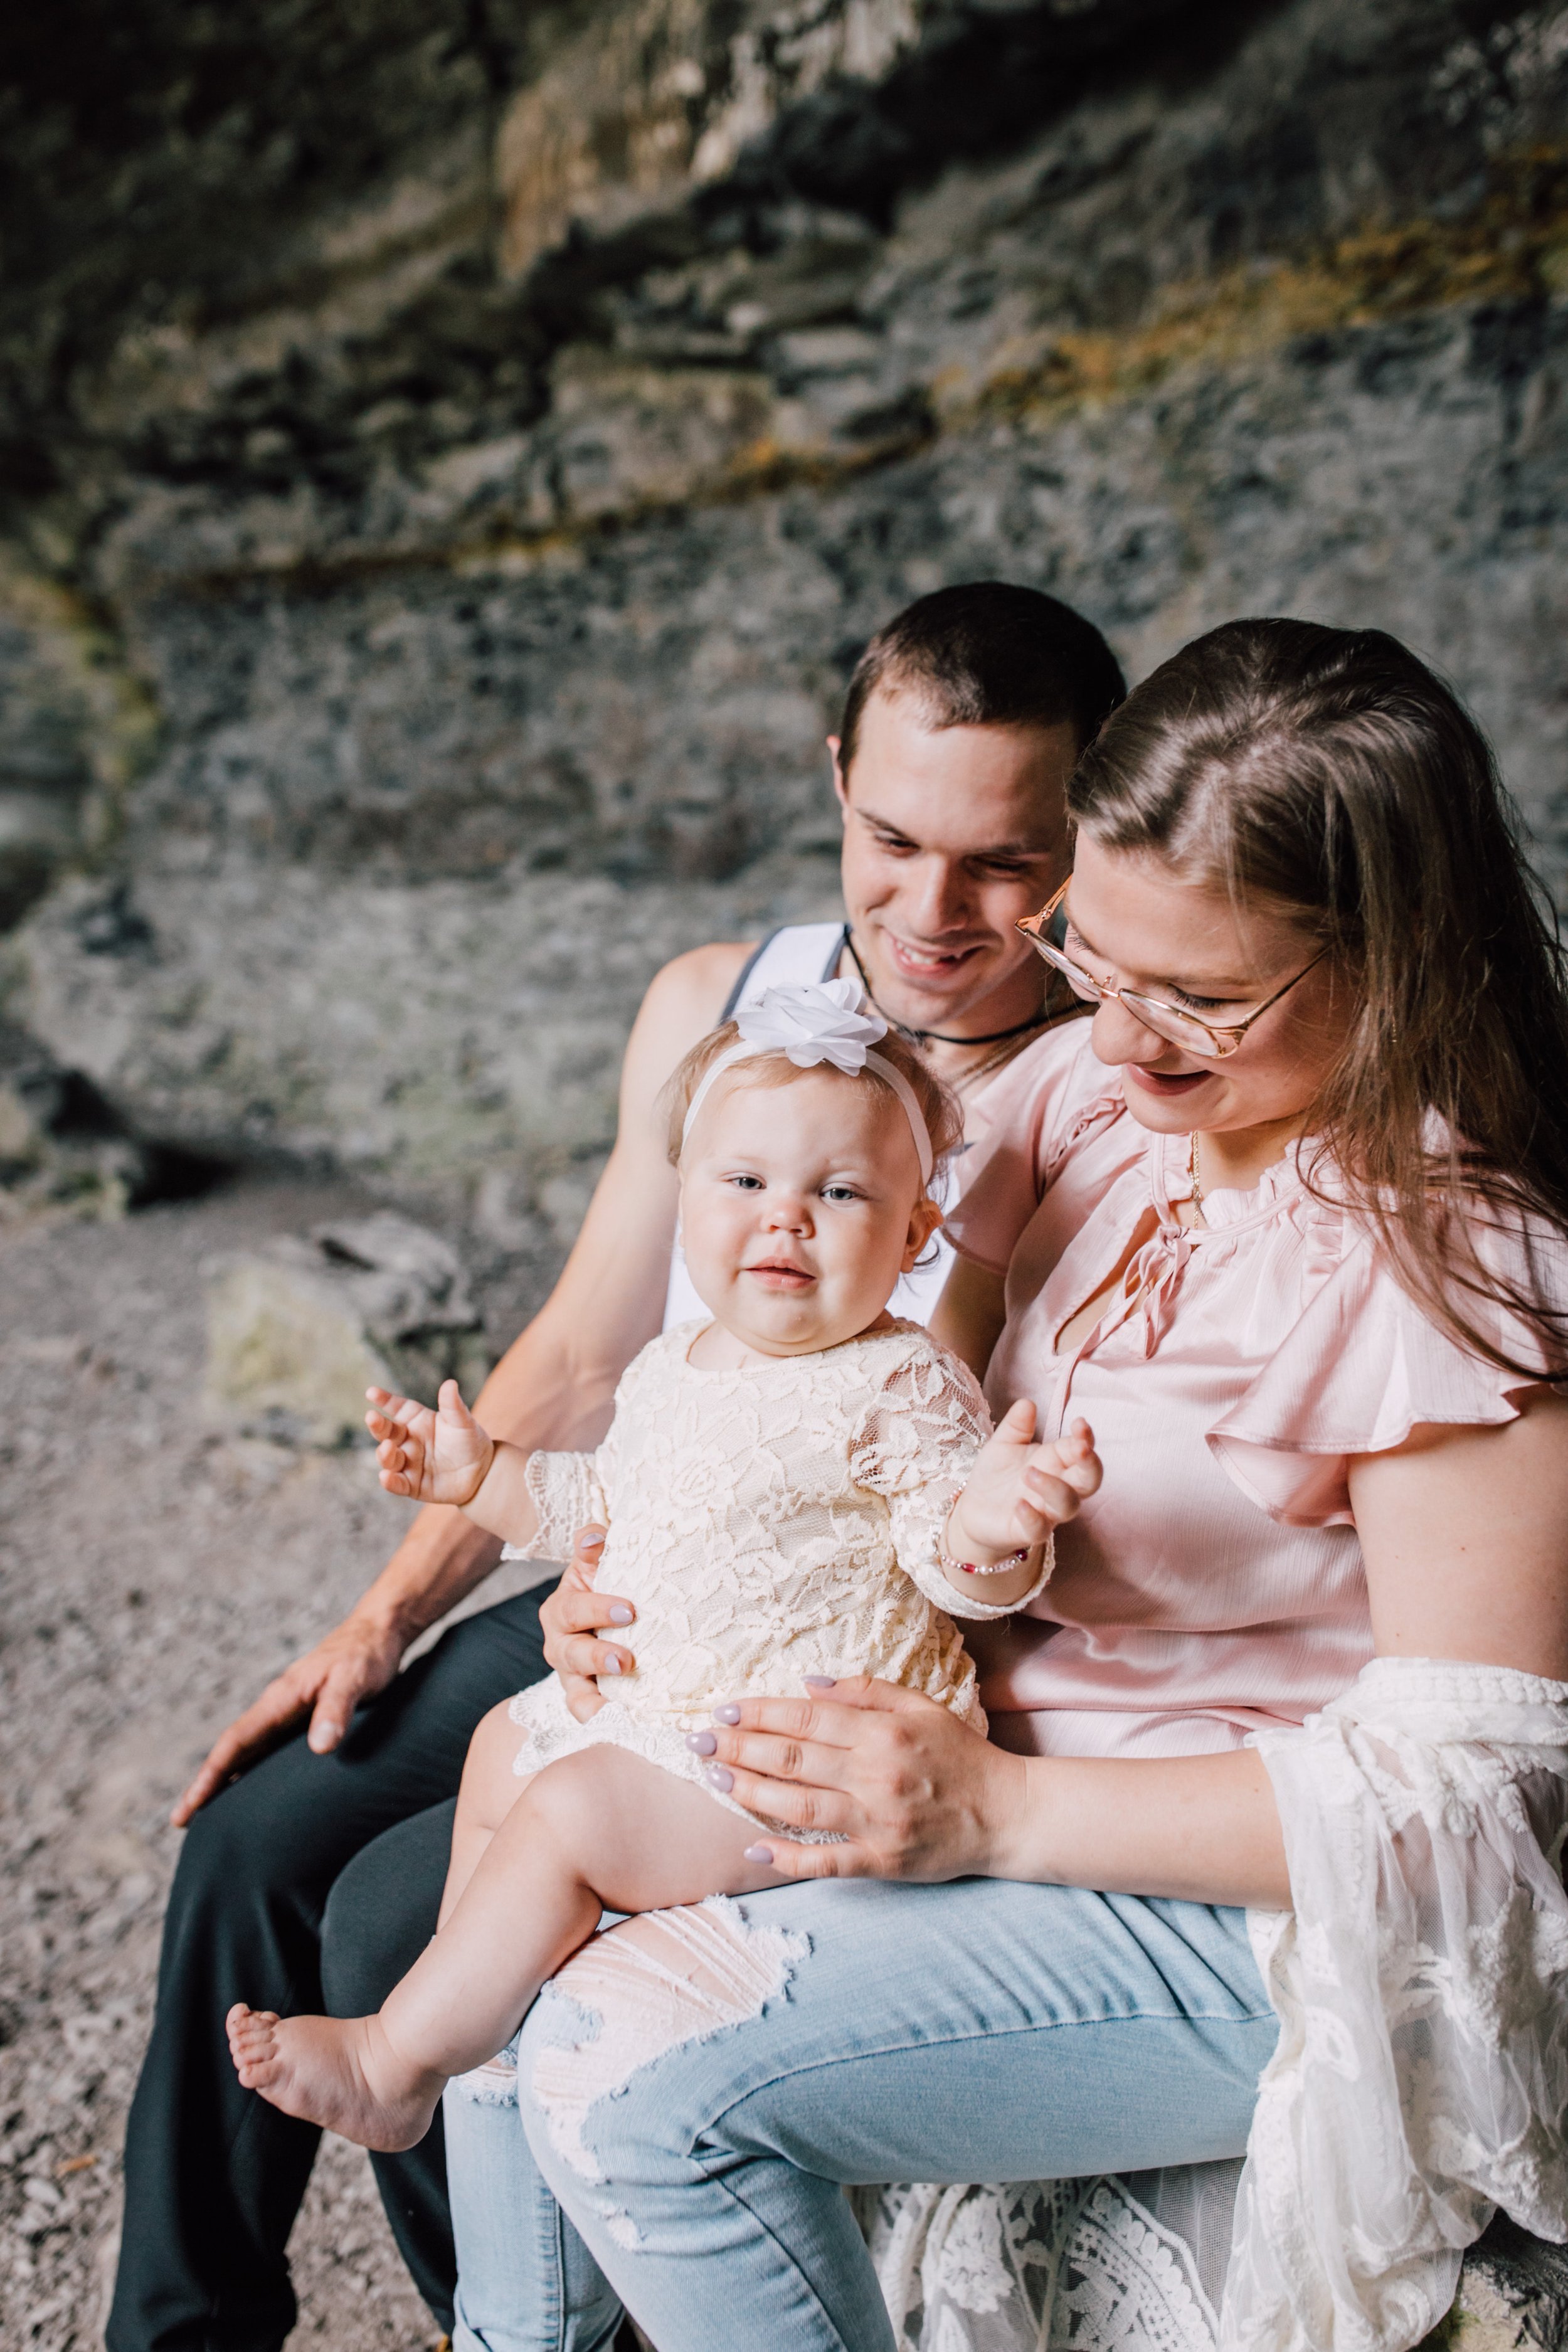  Family sits together during their waterfall photo shoot 